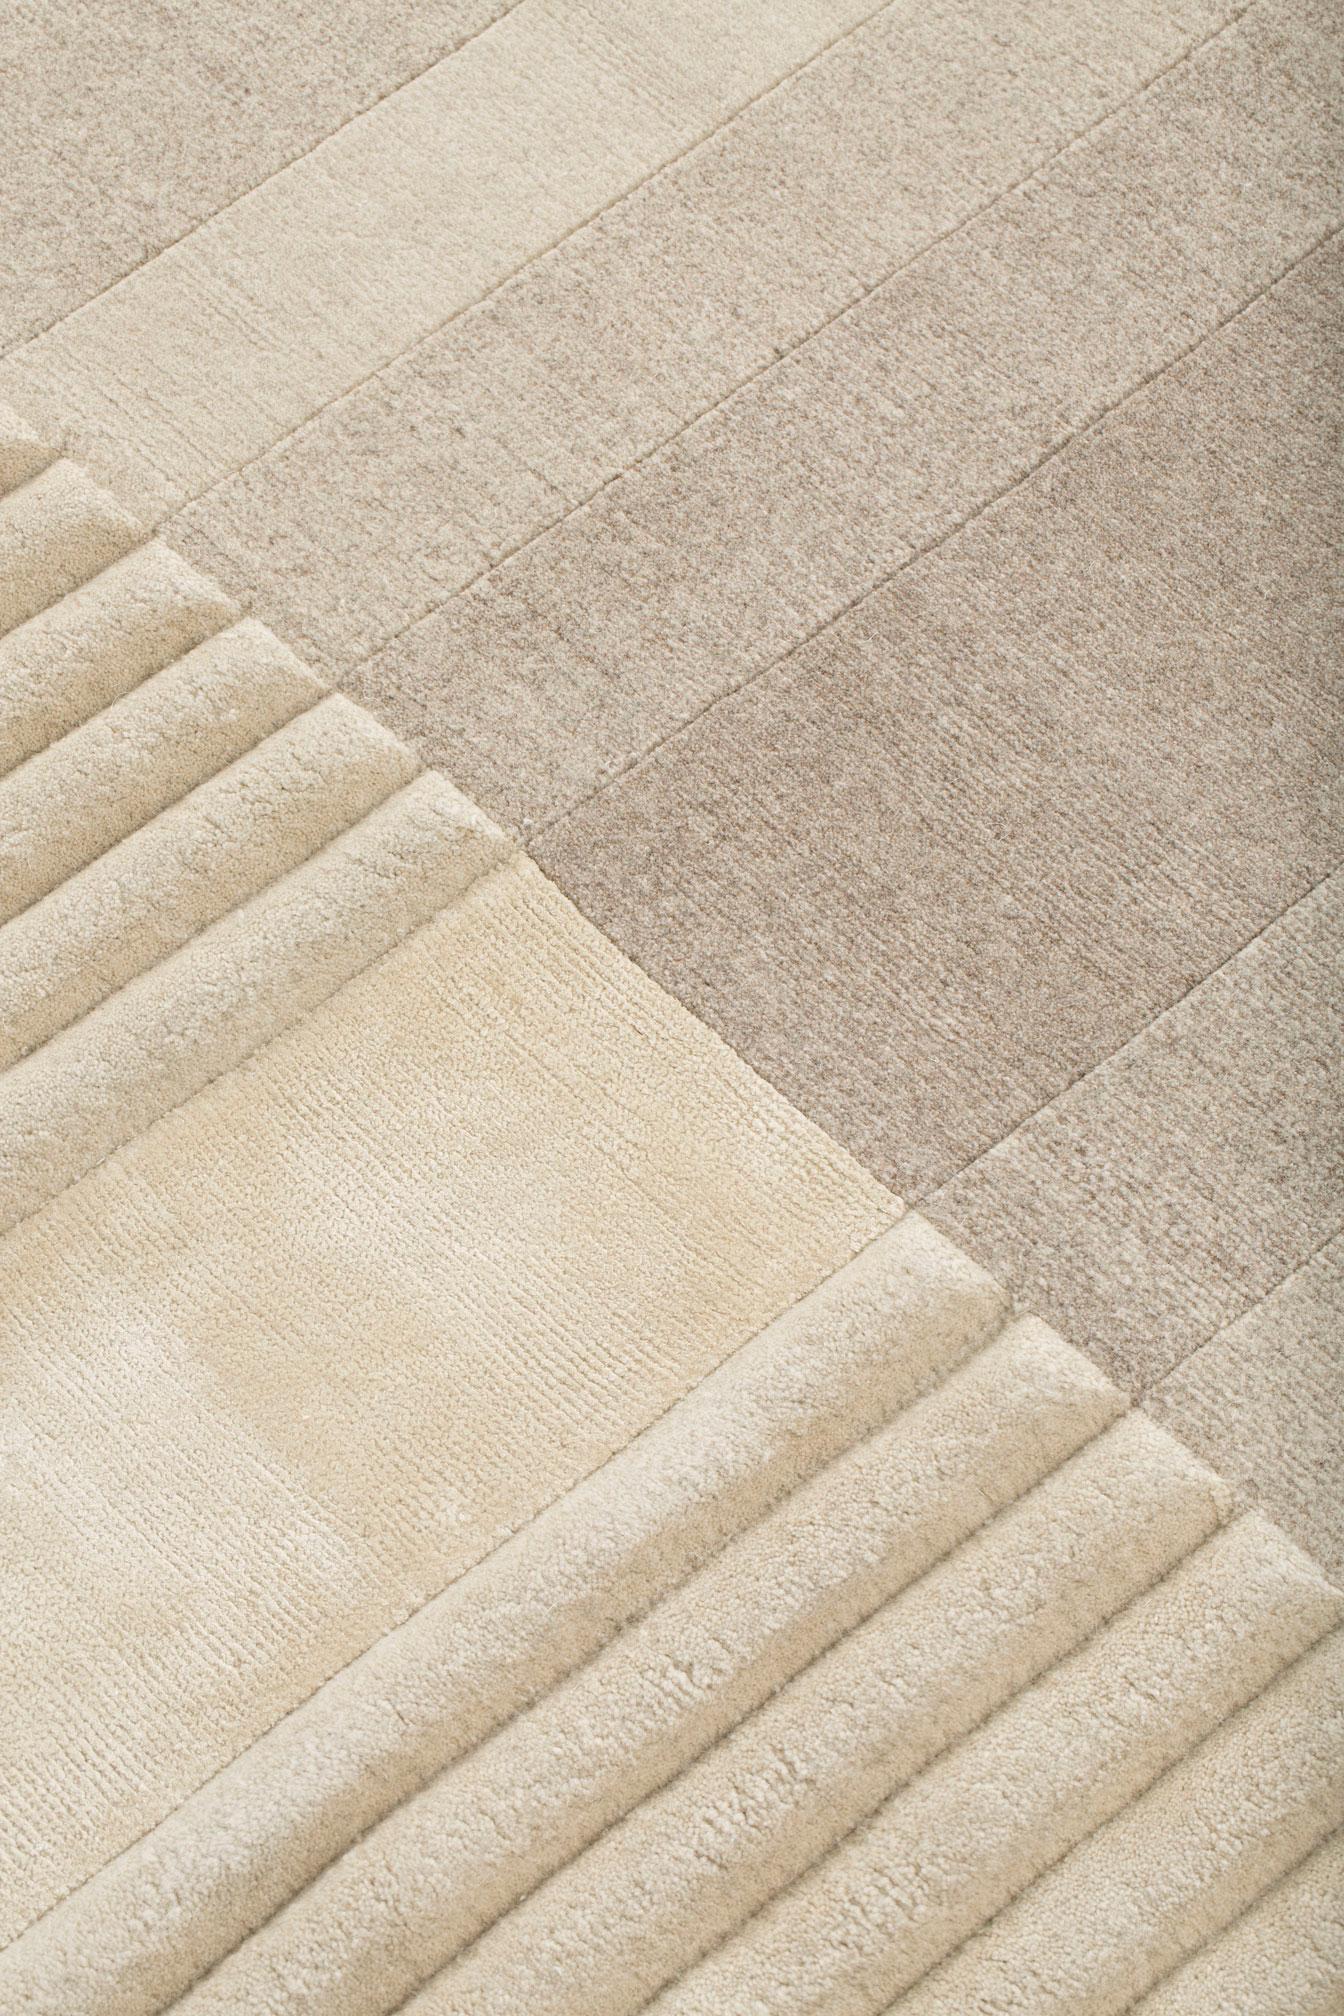 Nepalese cc-tapis Bliss Big Ultimate Undyed Rug Designed by Mae Engelgeer in STOCK